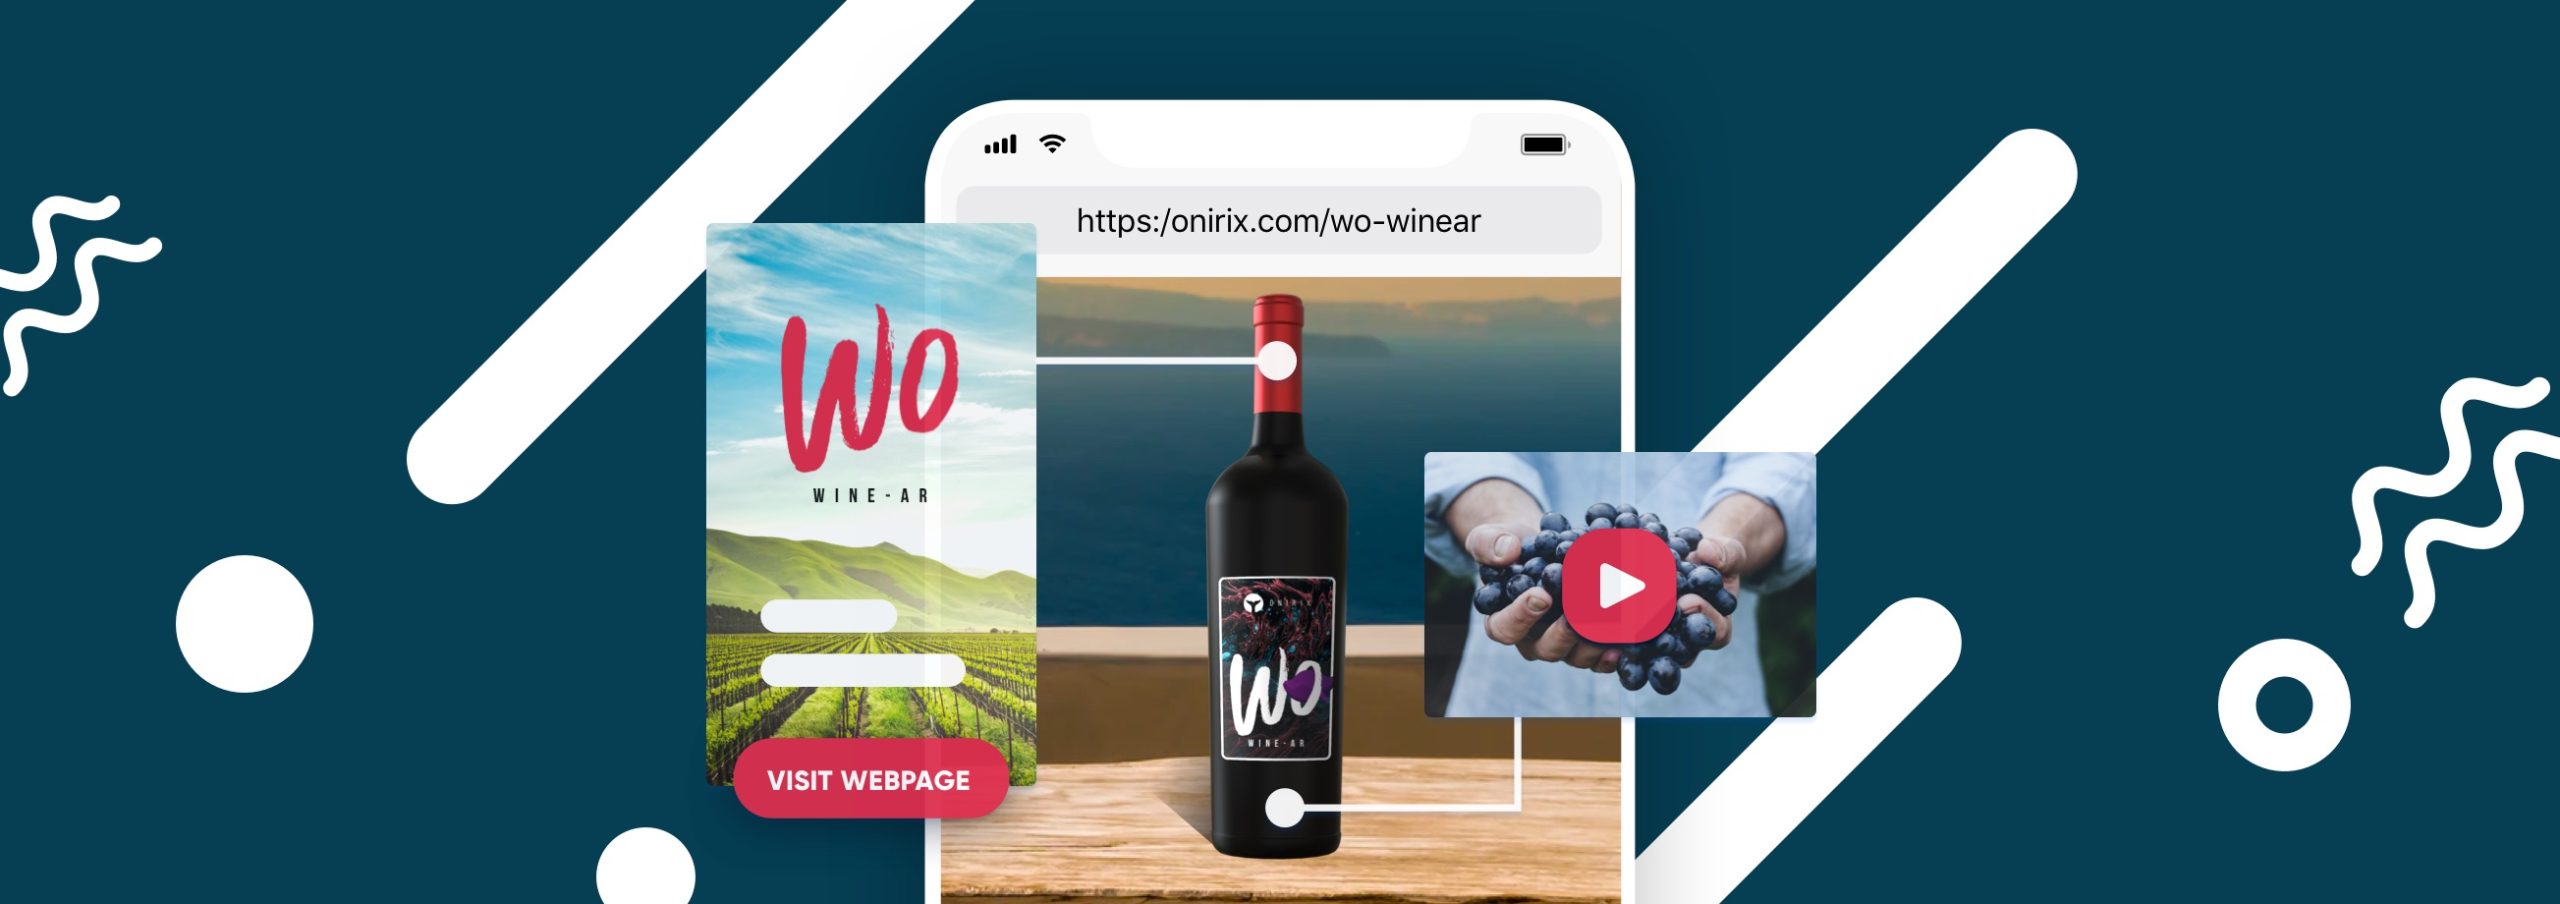 Examples of web augmented reality (WebAR) for packaging: wine bottles, cans, or packaging